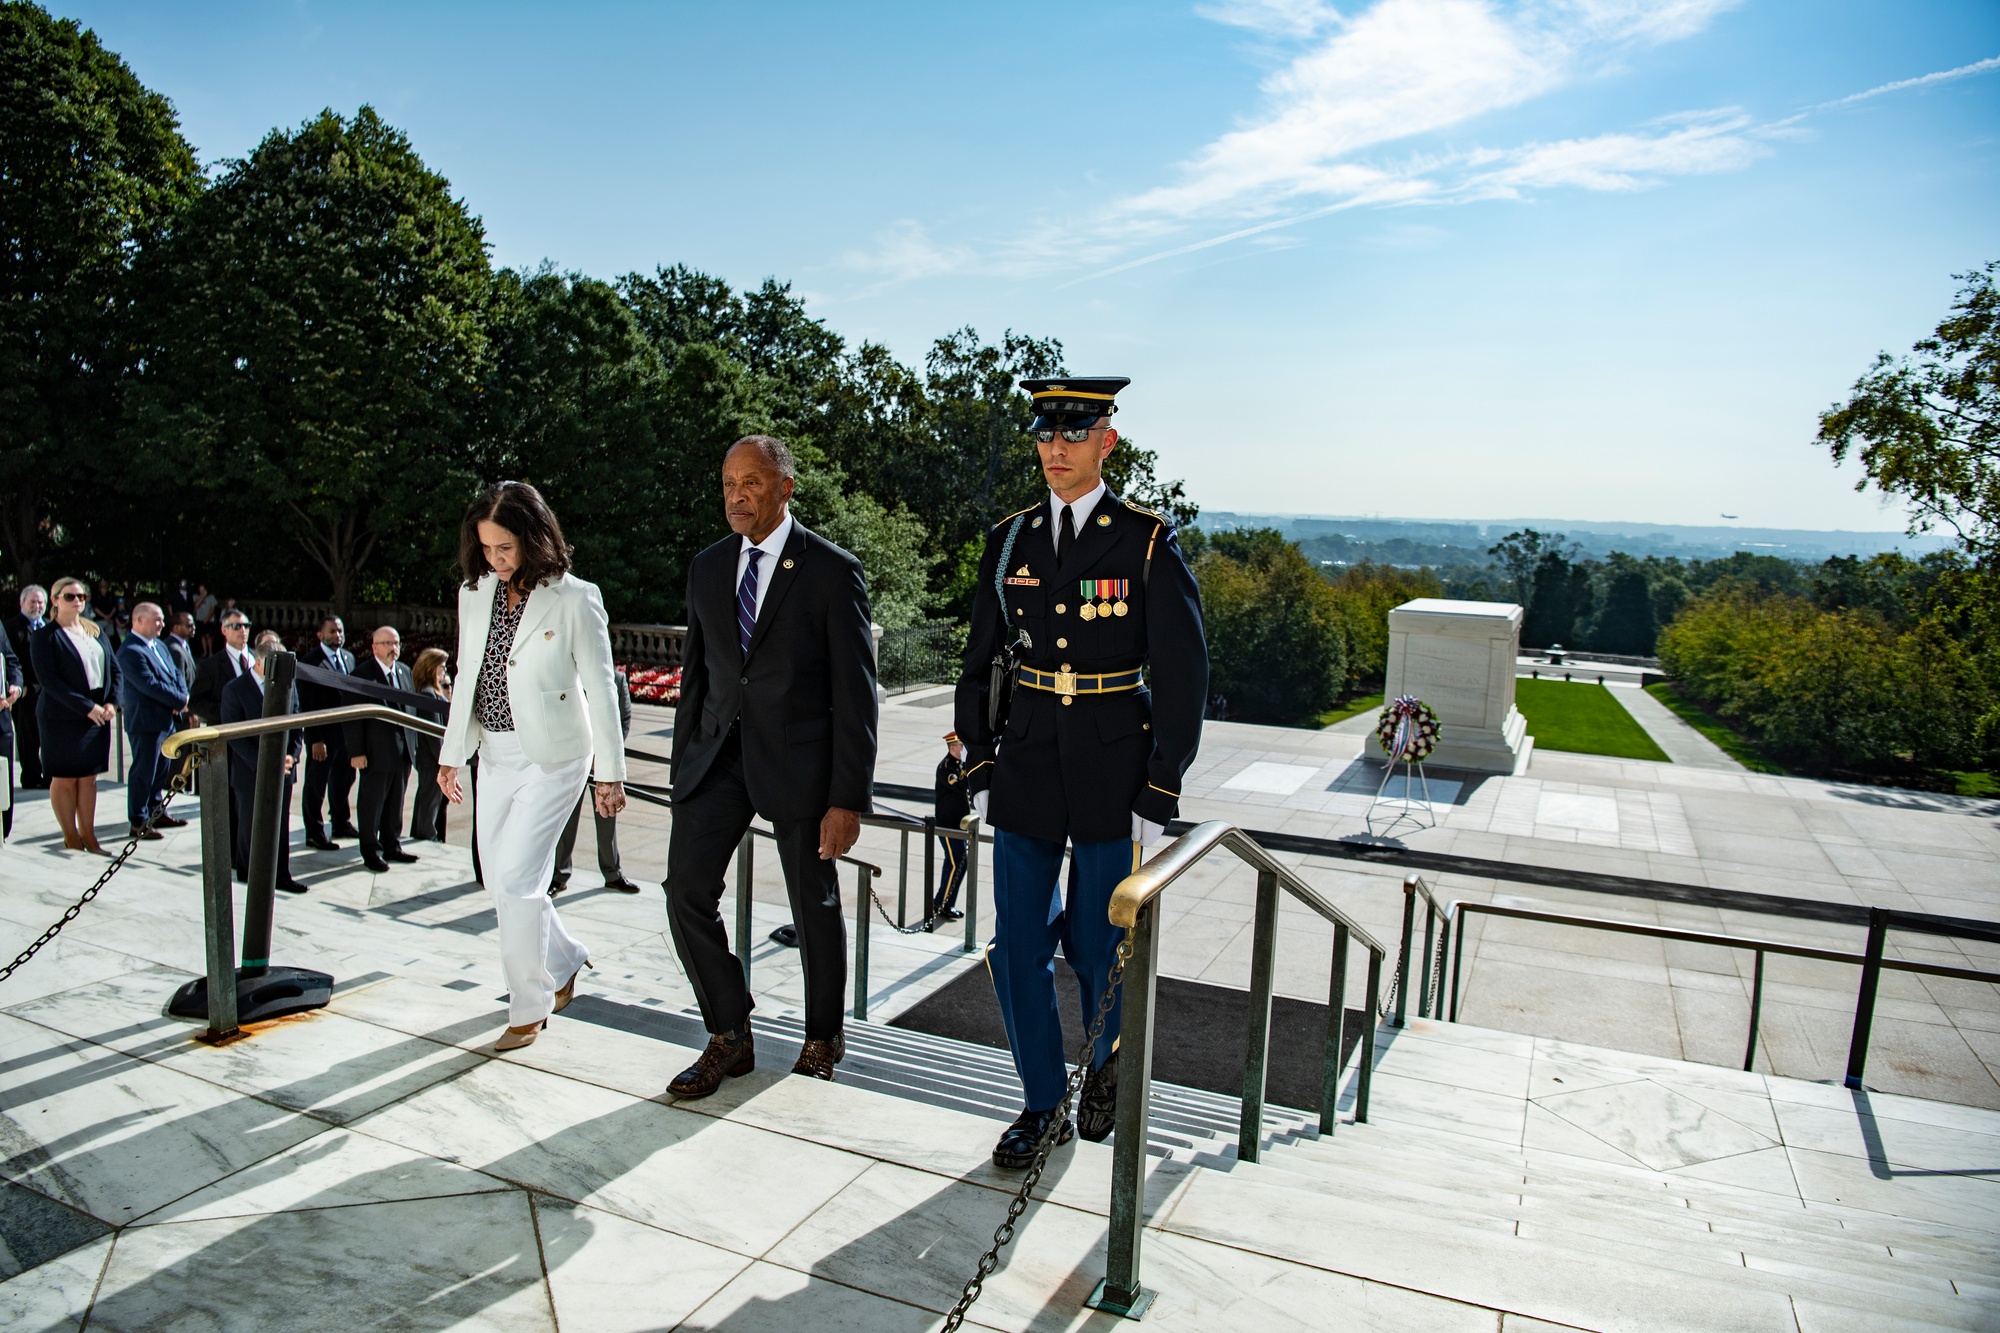 DVIDS - Images - U.S. Marshals Service Director Donald W. Washington  Participates in a Public Wreath-Laying Ceremony at the Tomb of the Unknown  Soldier [Image 8 of 25]